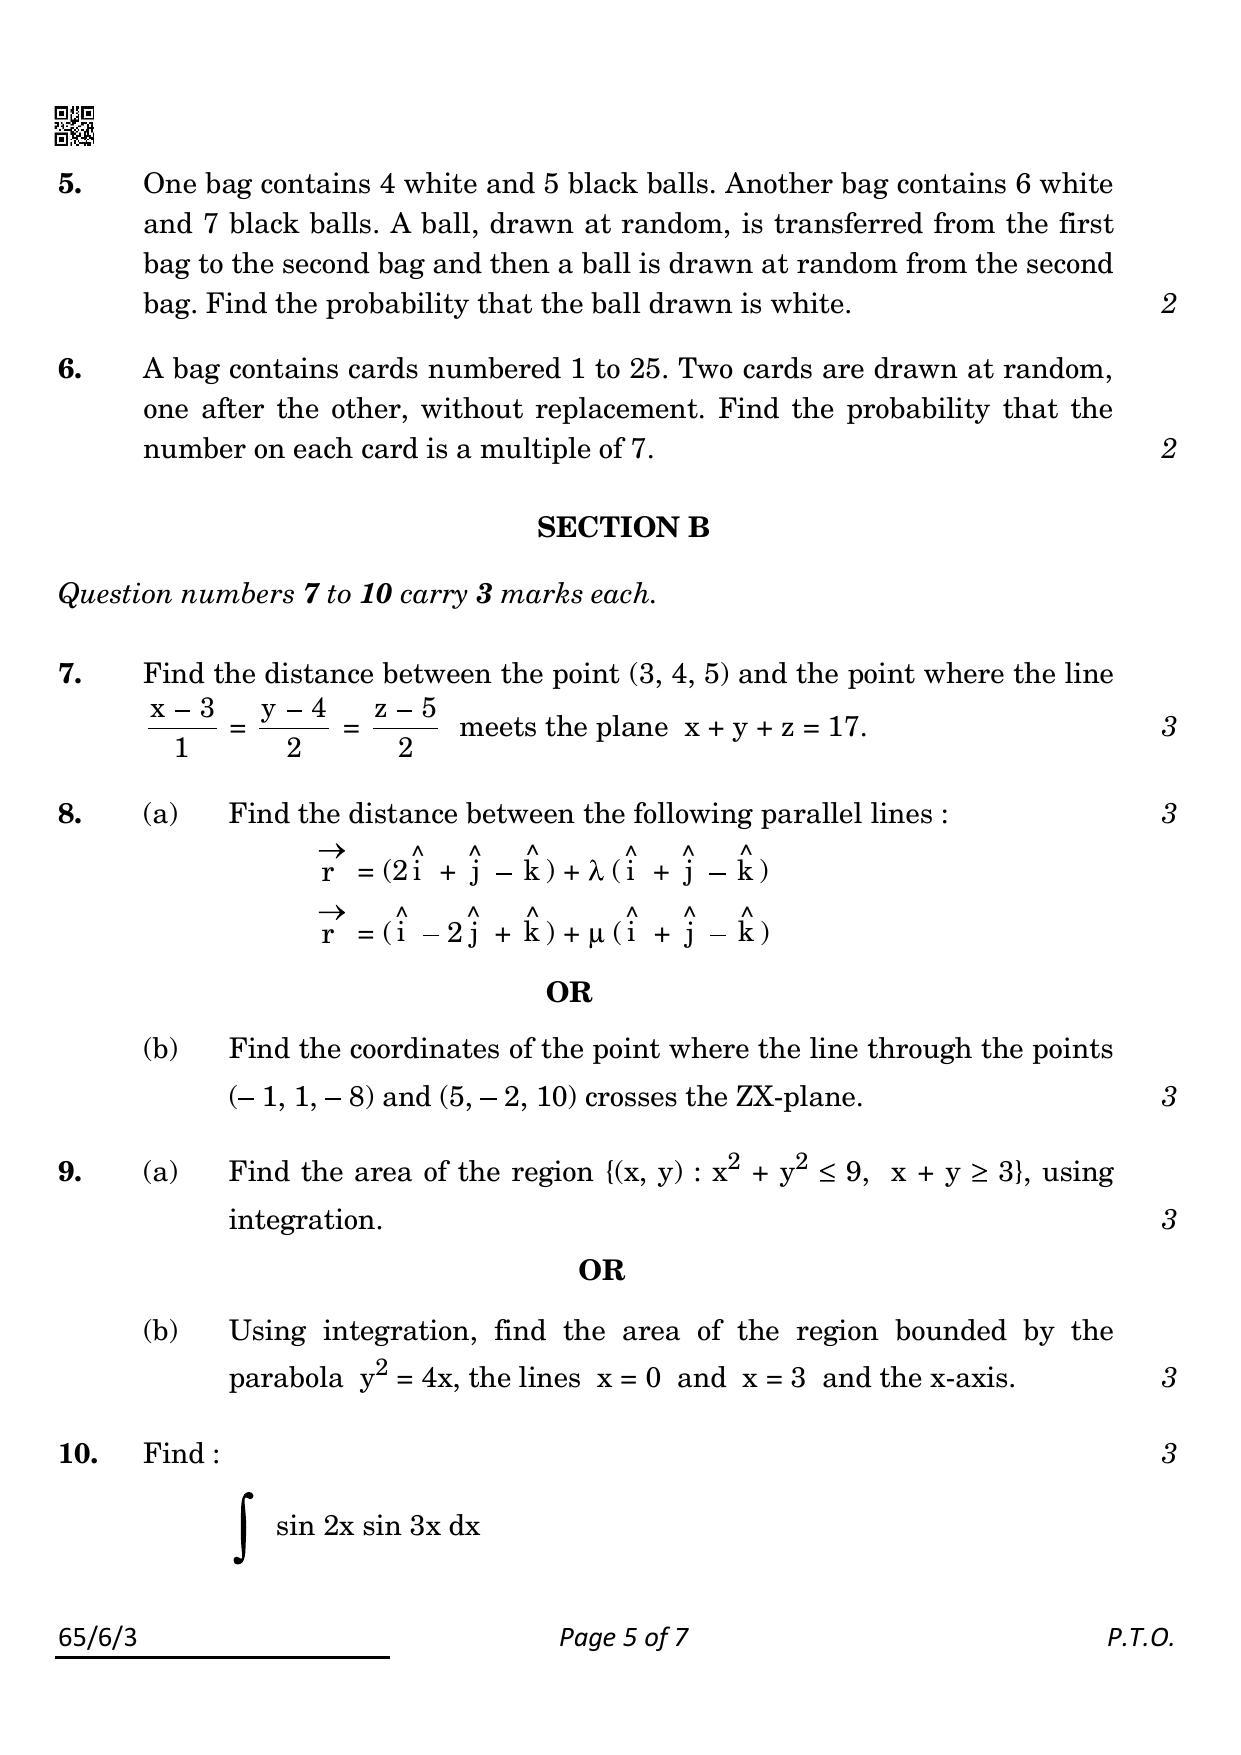 CBSE Class 12 65-6-3 Maths 2022 Compartment Question Paper - Page 5